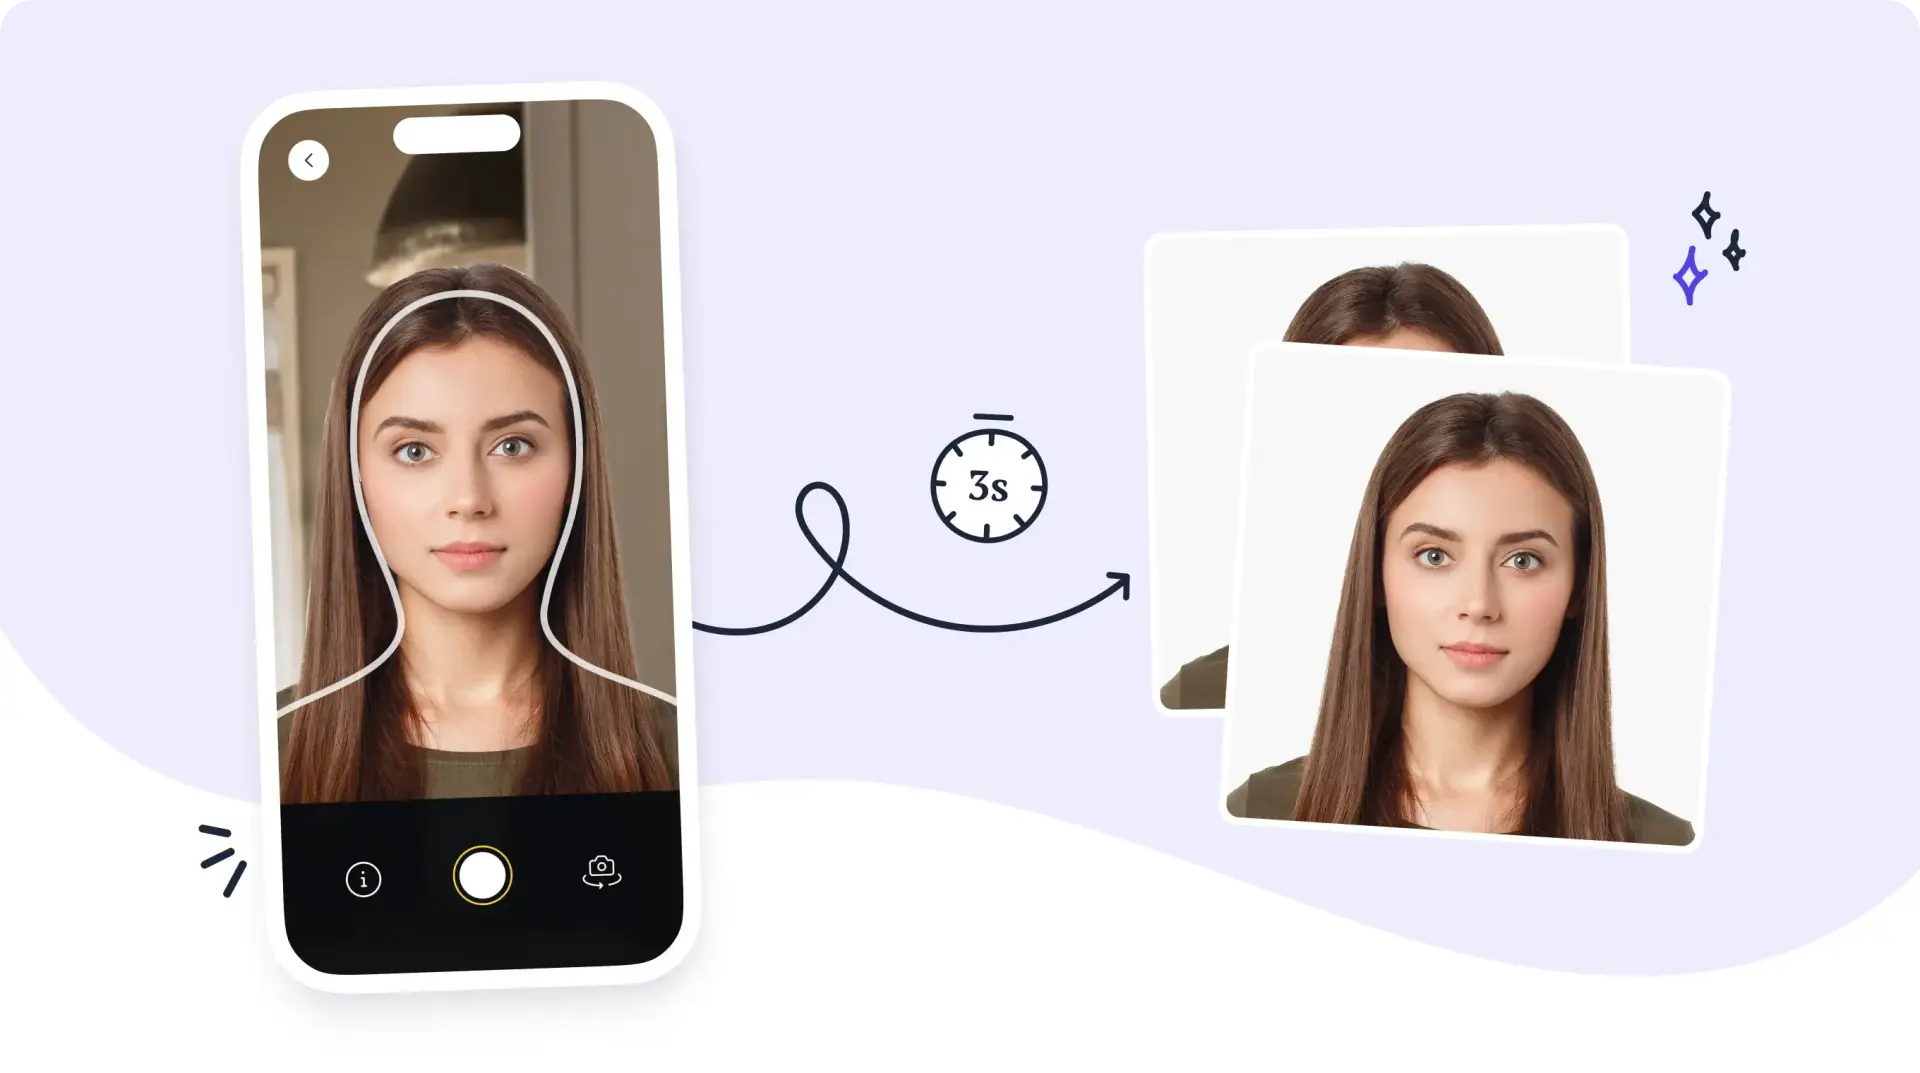 A photo transformed into compliant Canadian passport photos with the Passport Photo Online service.